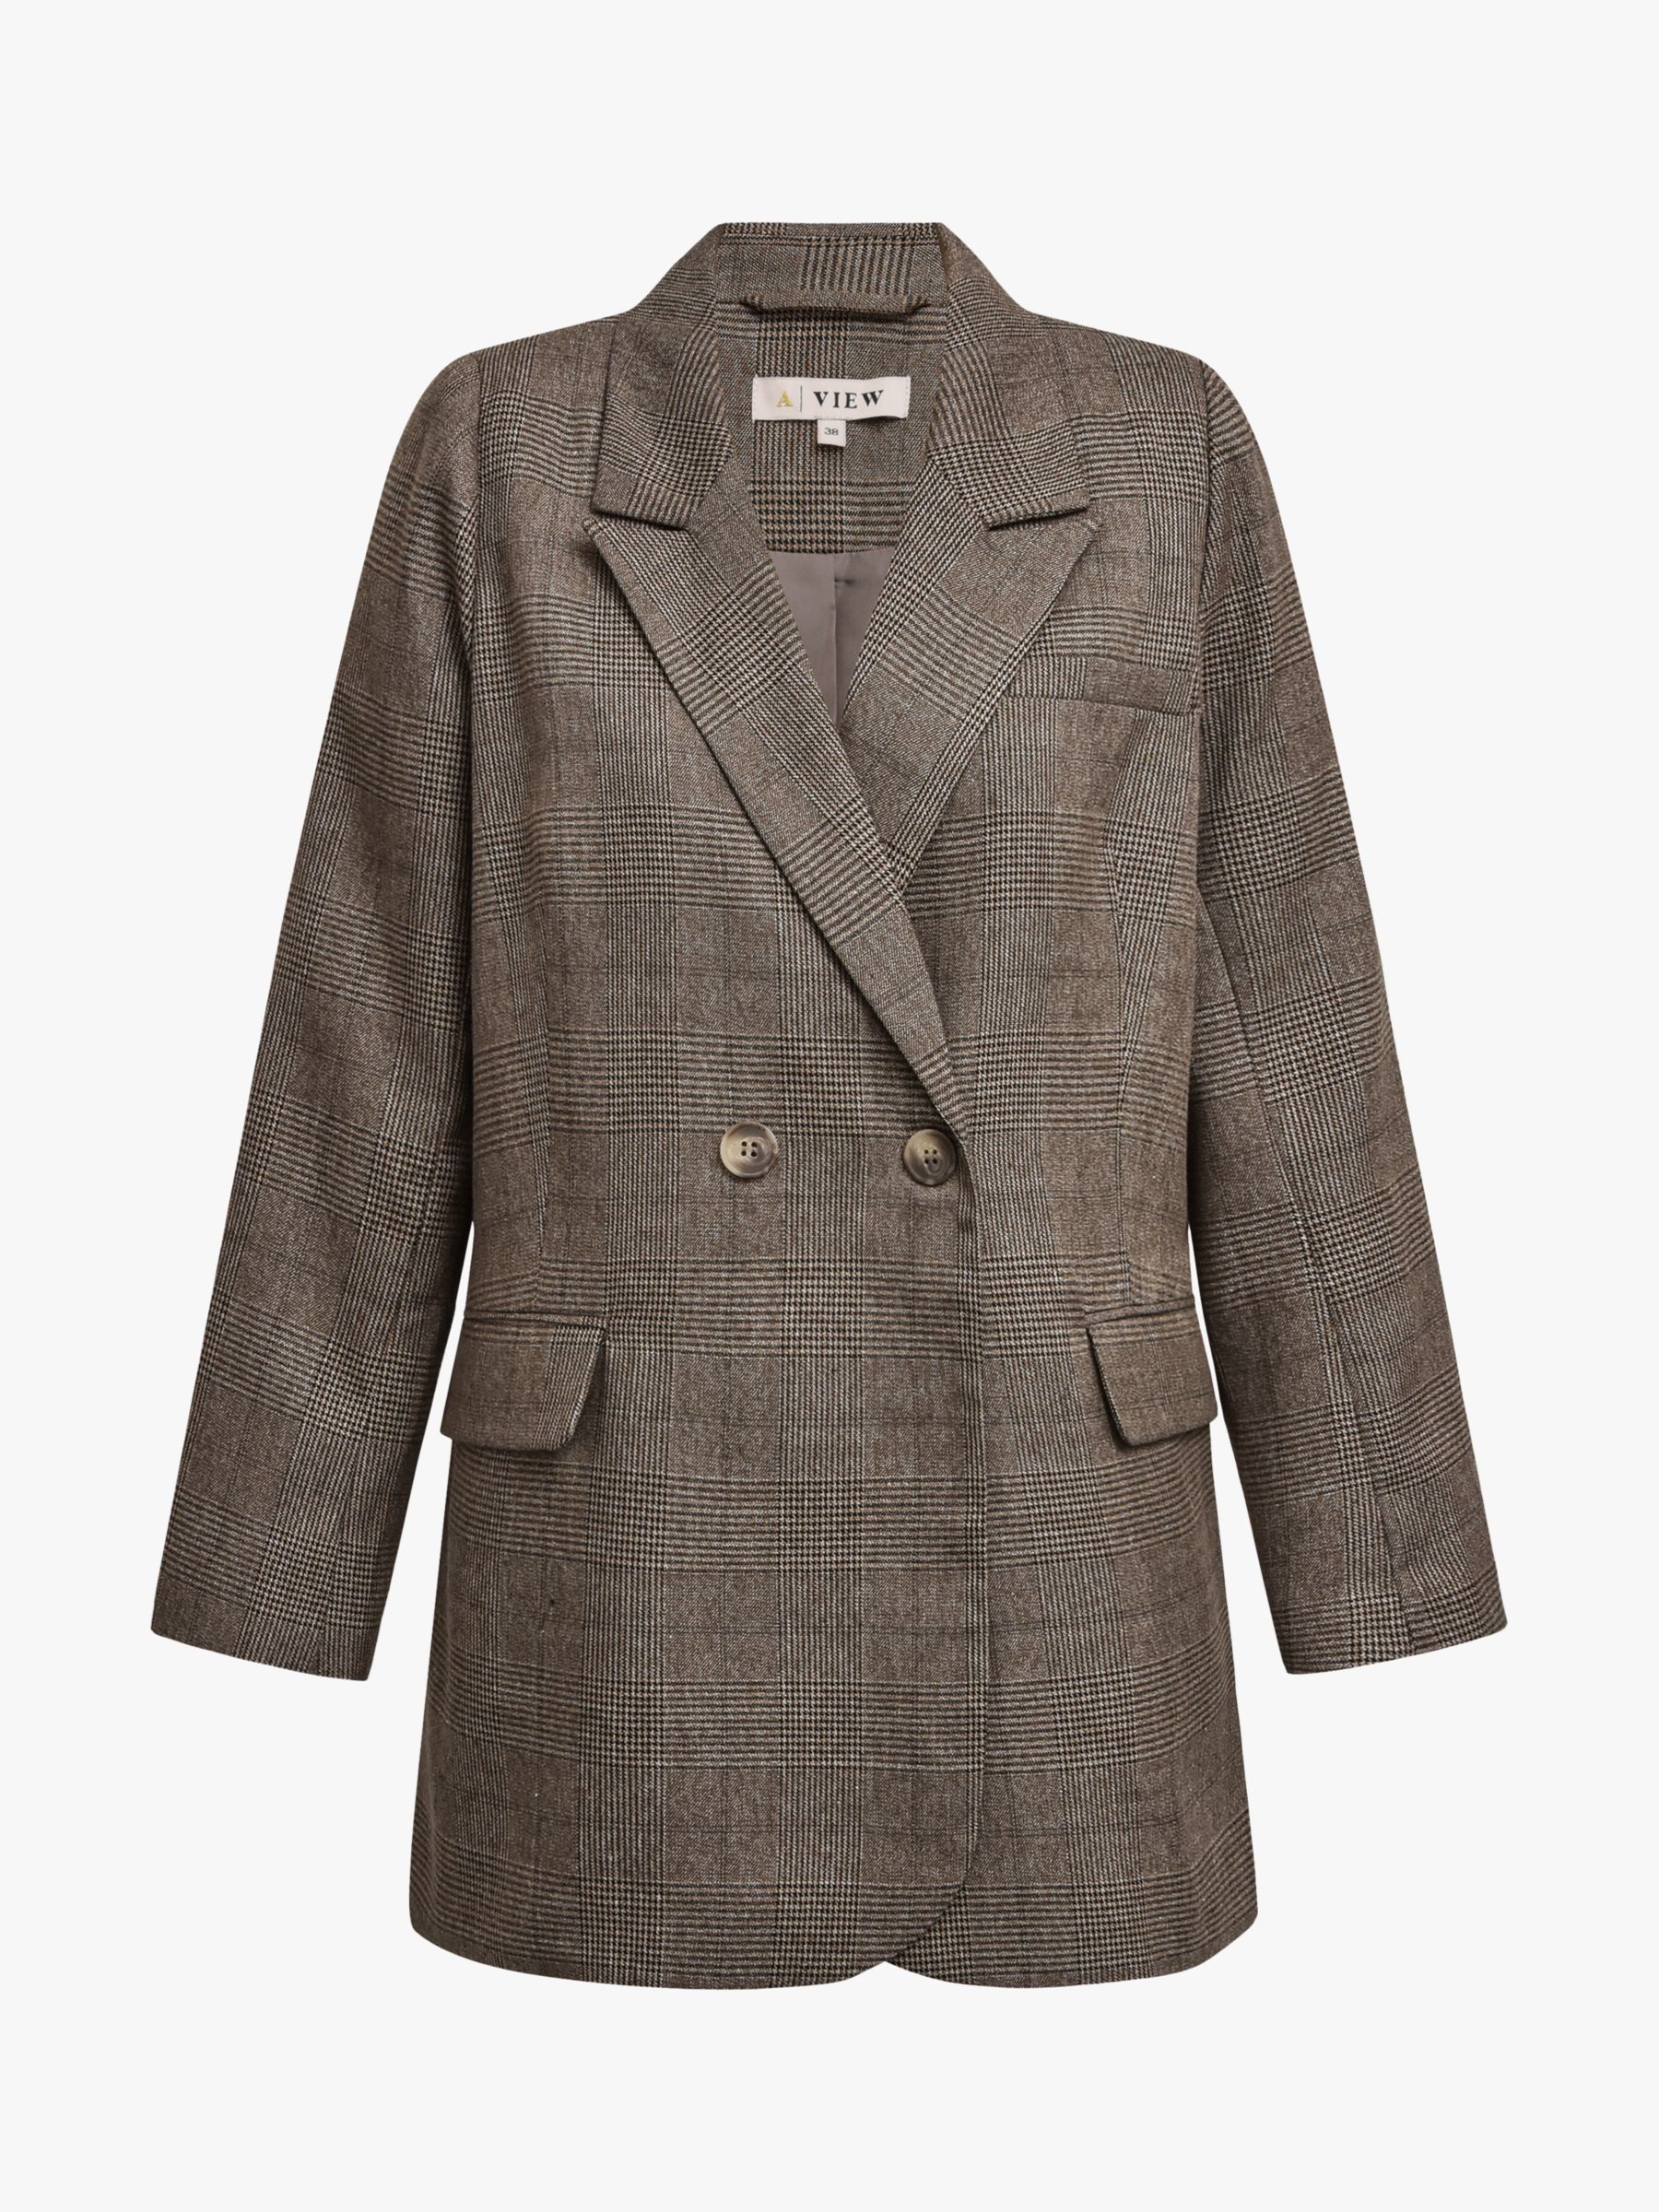 Buy A-VIEW Annali Oversized Check Blazer, Brown Online at johnlewis.com